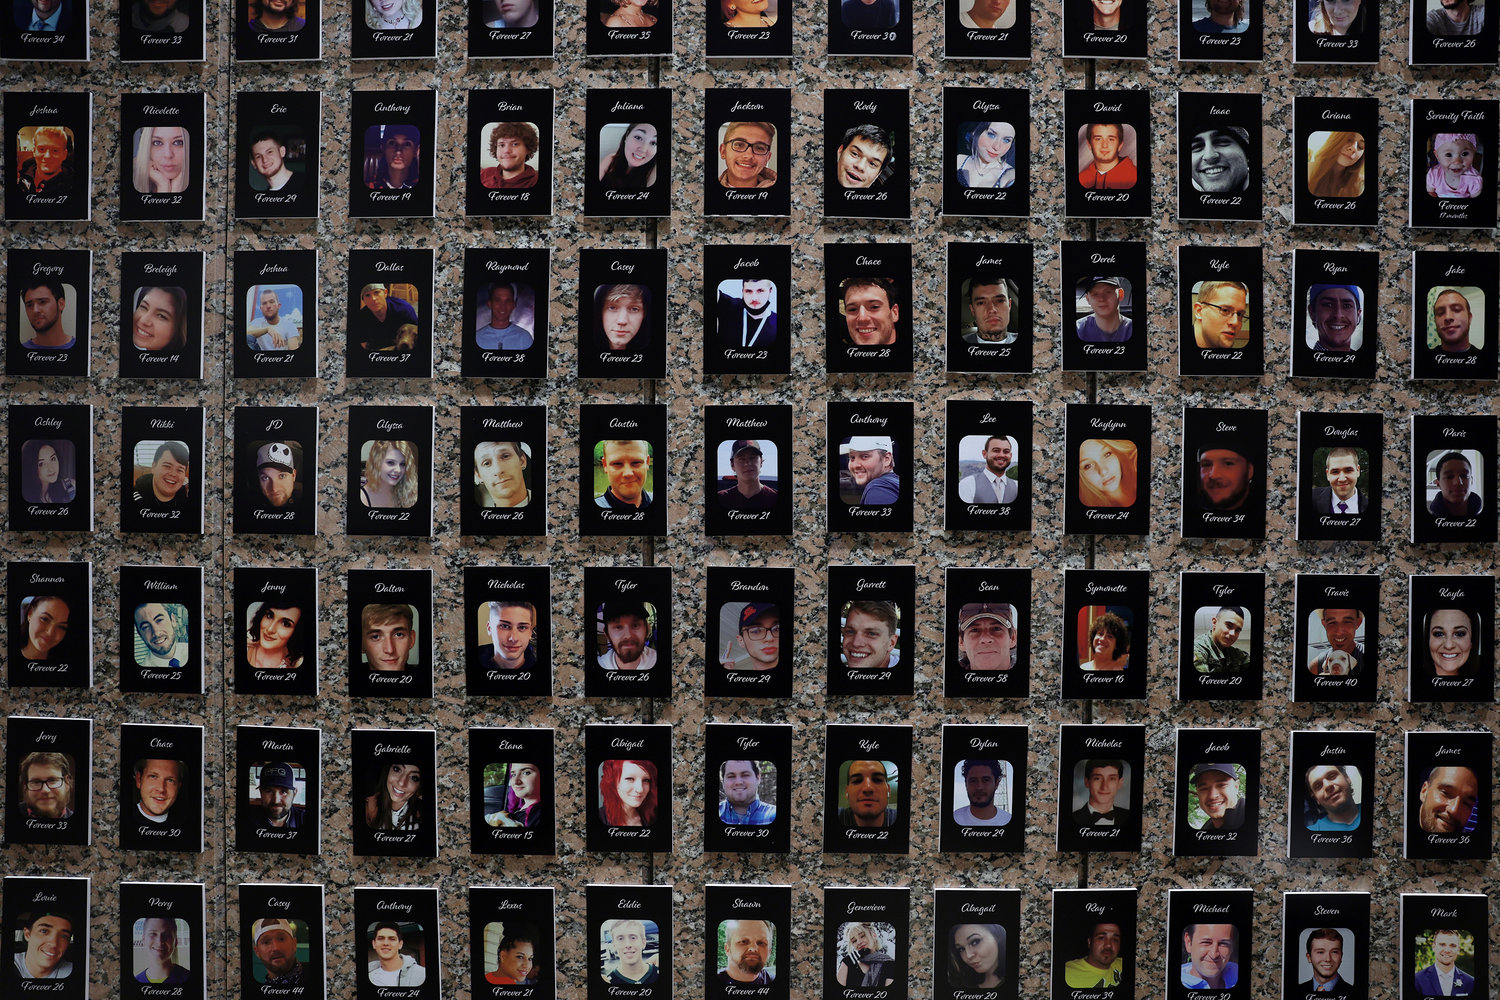 Photos of fentanyl victims on display at The Faces of Fentanyl Memorial at the U.S. Drug Enforcement Administration headquarters on Sept. 27, 2022, in Arlington, Virginia. (Alex Wong/Getty Images/TNS)